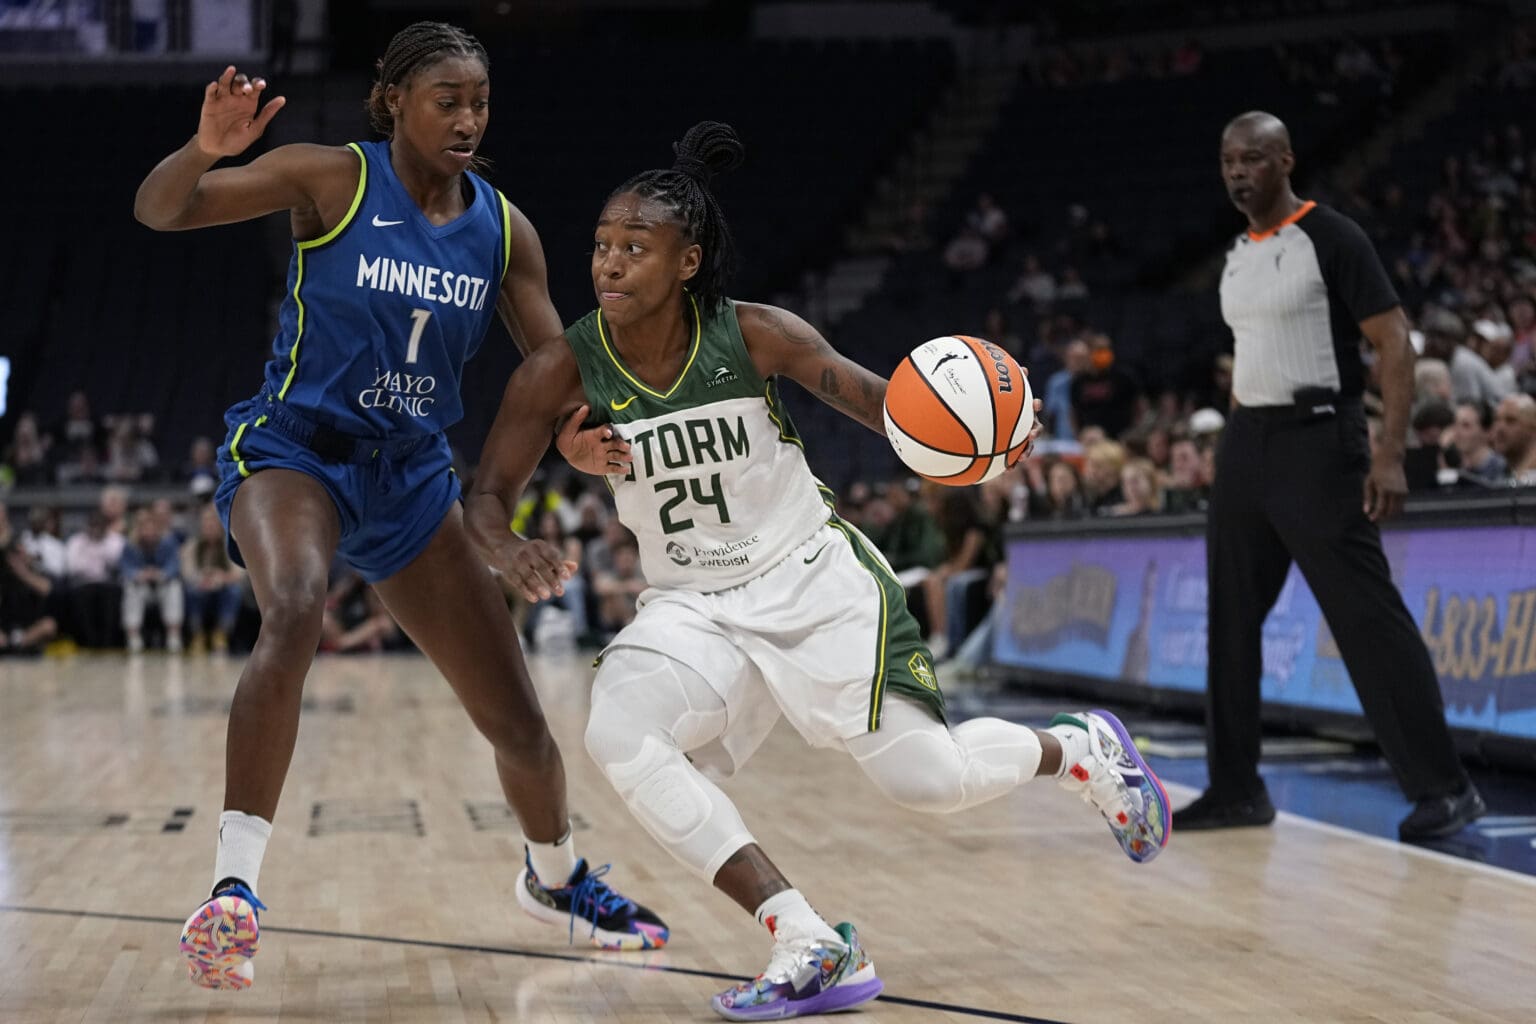 Seattle Storm guard Jewell Loyd (24) works toward the basket against Minnesota Lynx guard Diamond Miller (1) during the first half of a WNBA basketball game Tuesday